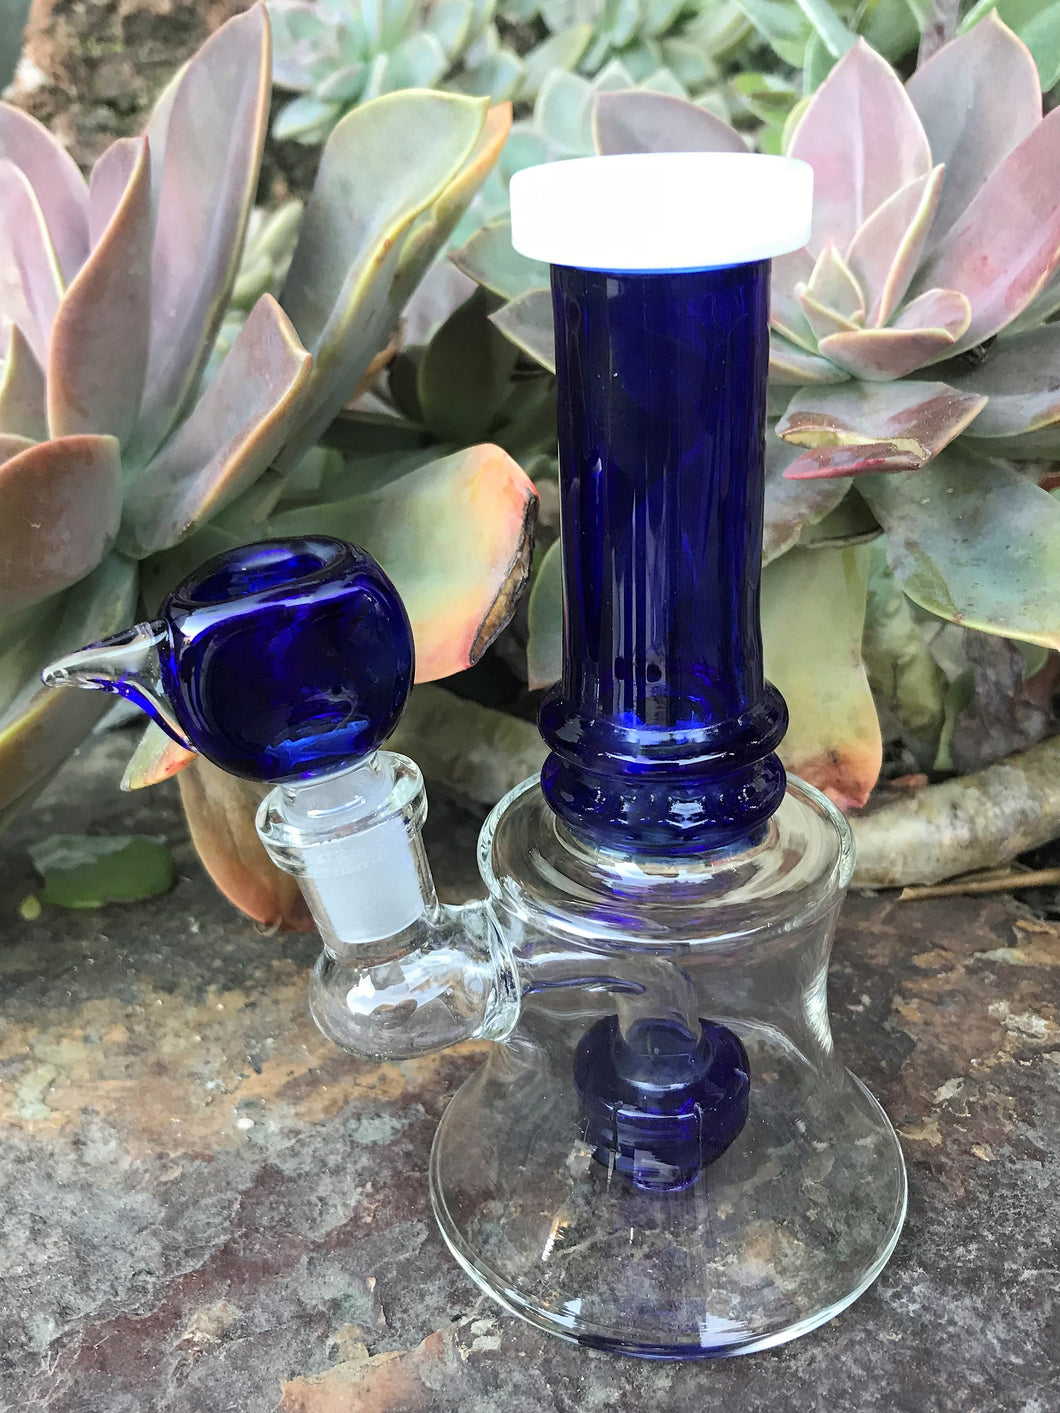 6” Petite & Sweet Blue Clear Glass Bong with Shower Perc & 14mm Male Bowl w/Handle - Cobalt